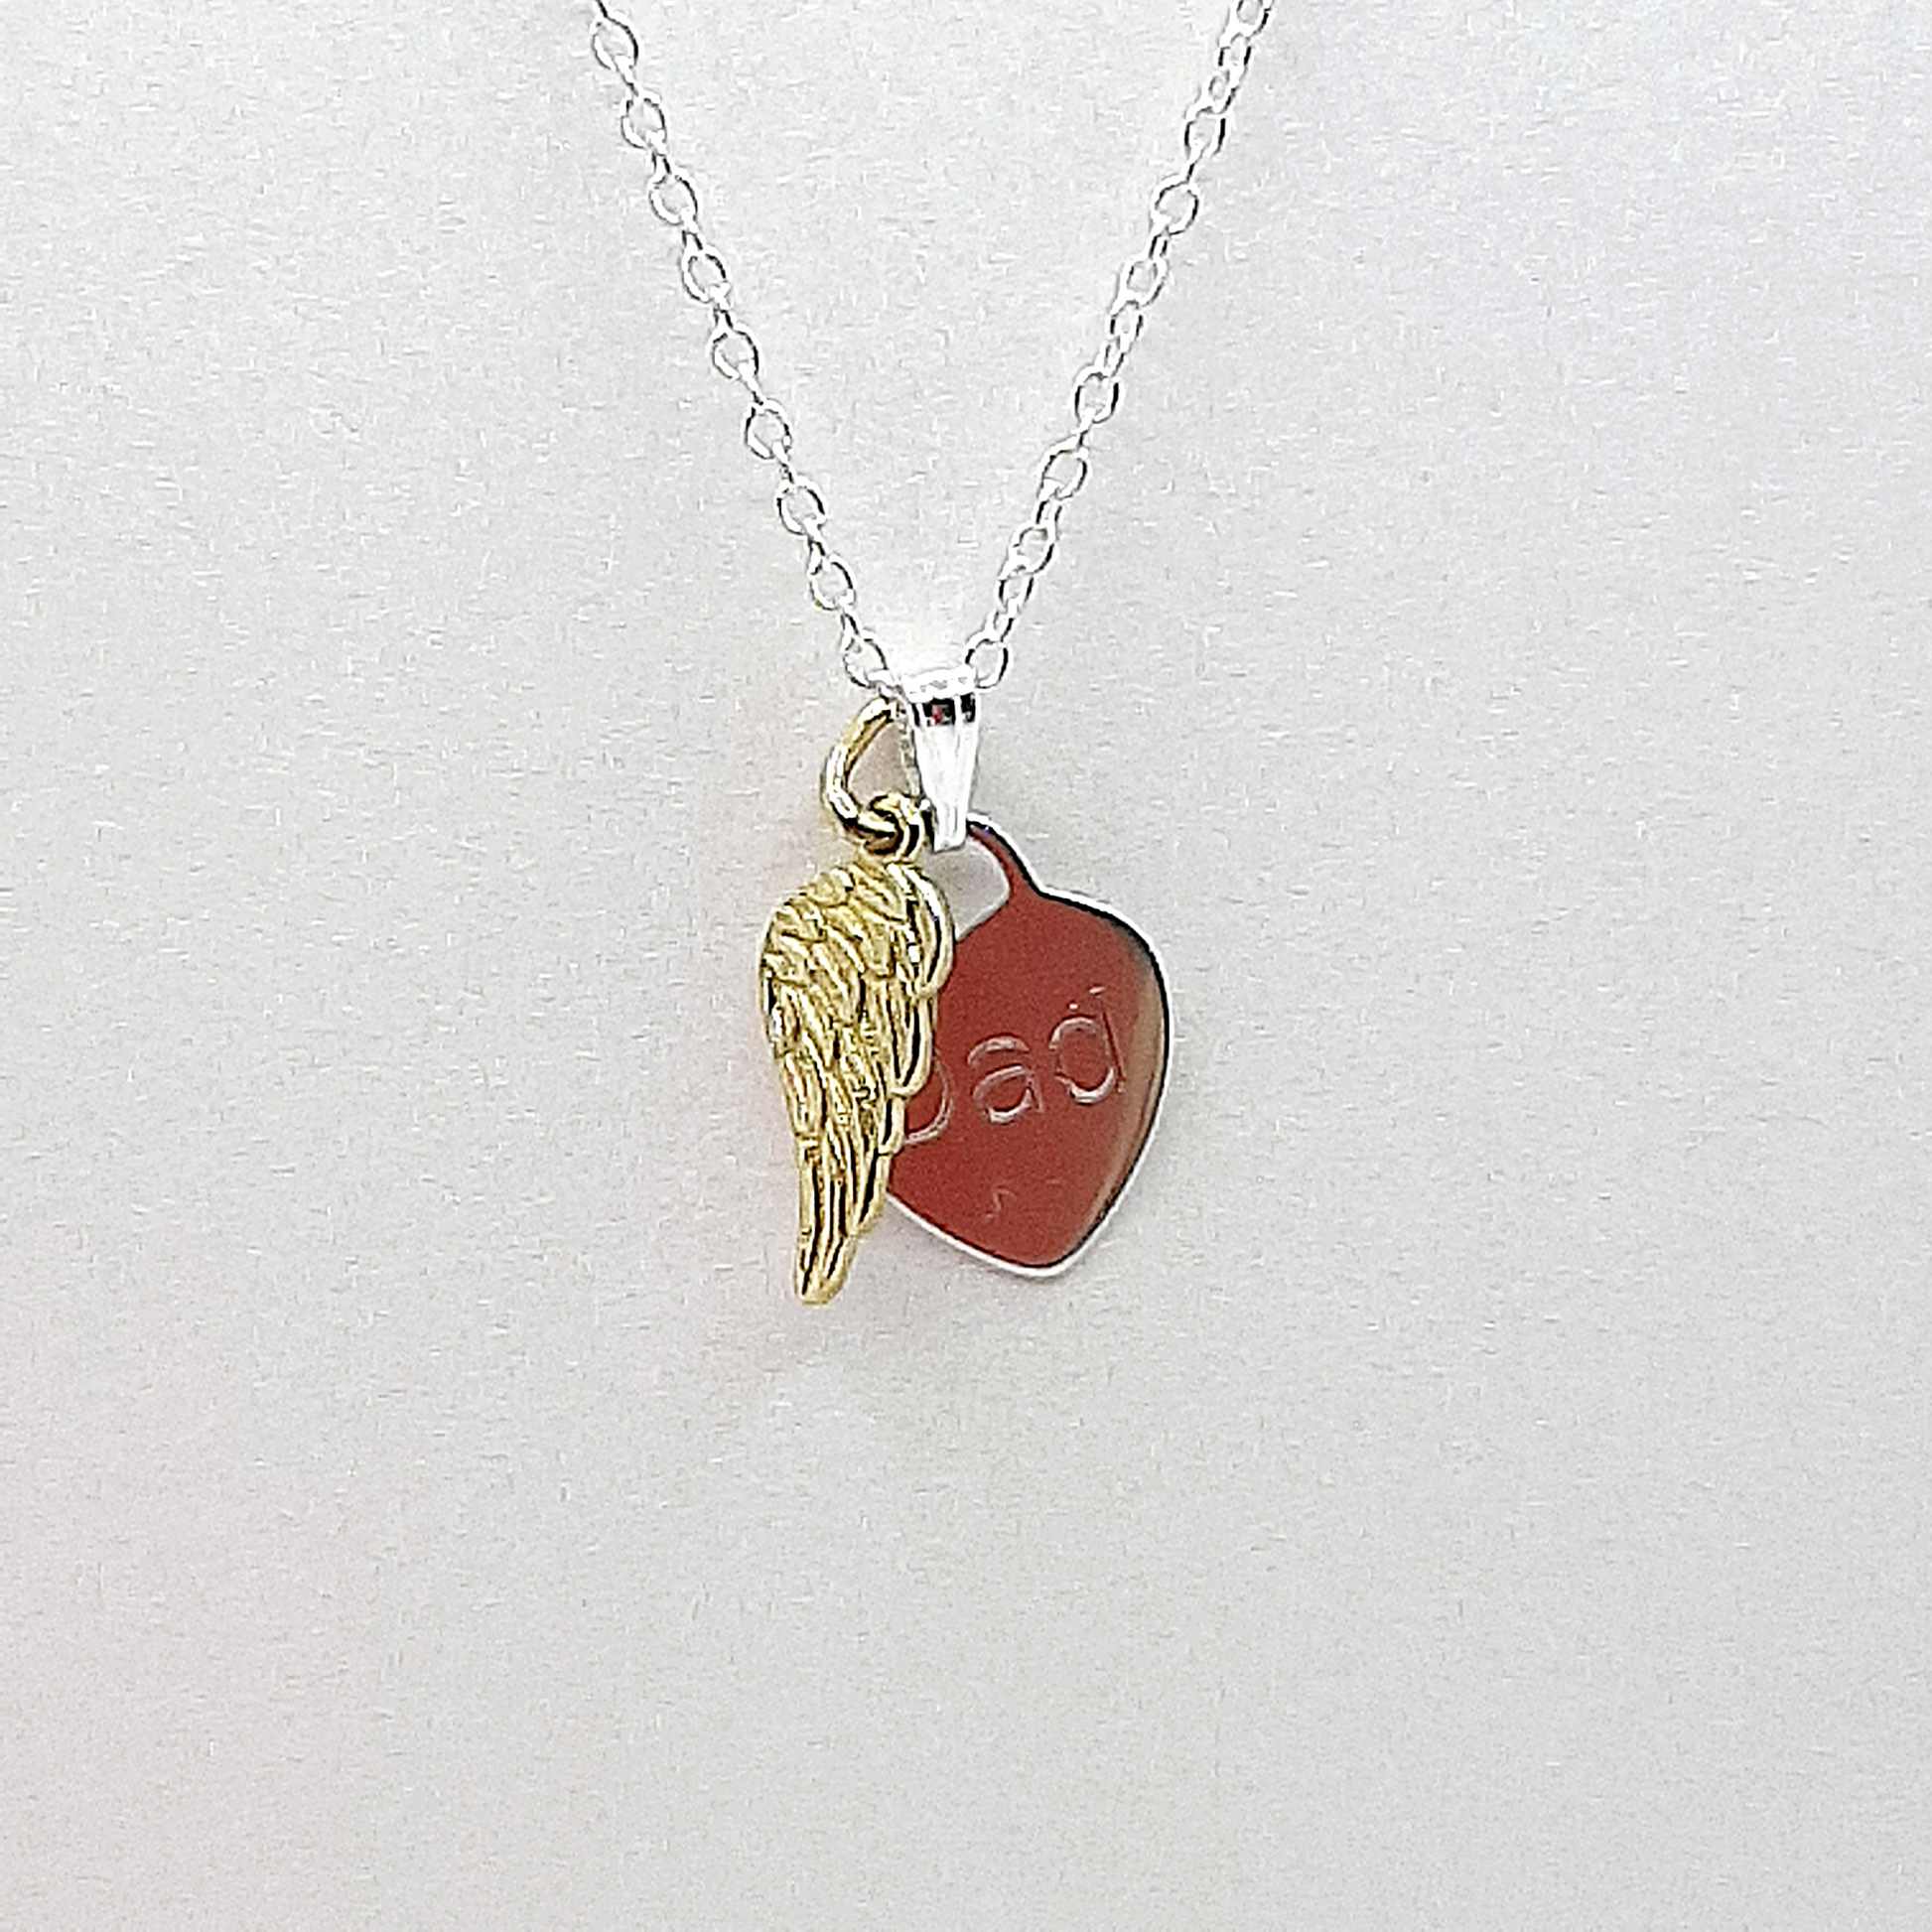 Gold vermeil on sterling silver angel wing is suspended from a sterling silver chain and accompanied by a sterling silver heart engraved with name of your choice. The pendant is mounted on high quality card with wording of your choice. This card is I have a guardian angel, I call him Dad.